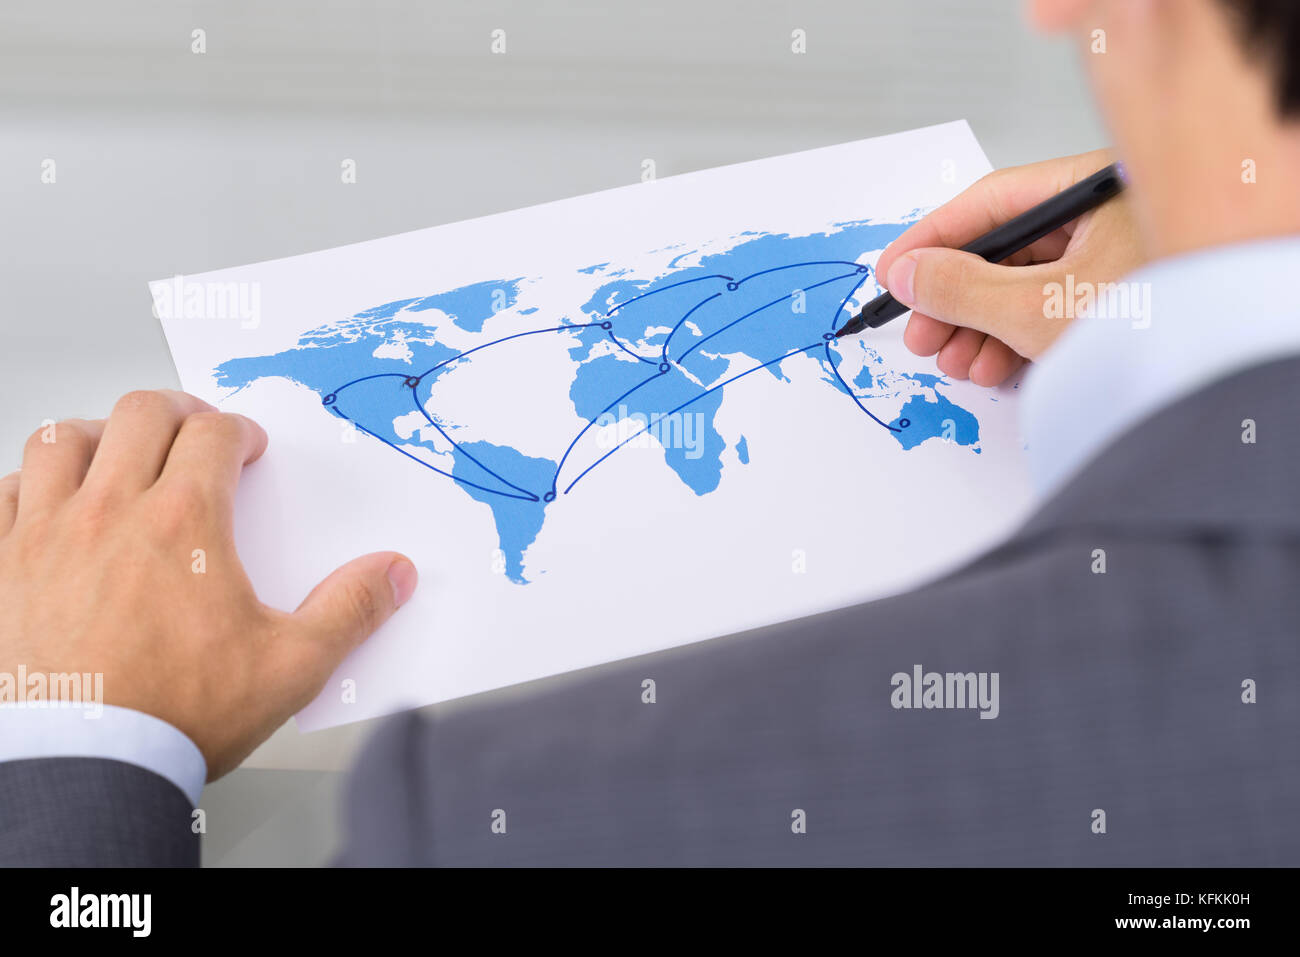 Global business concept. Over the shoulder view Stock Photo